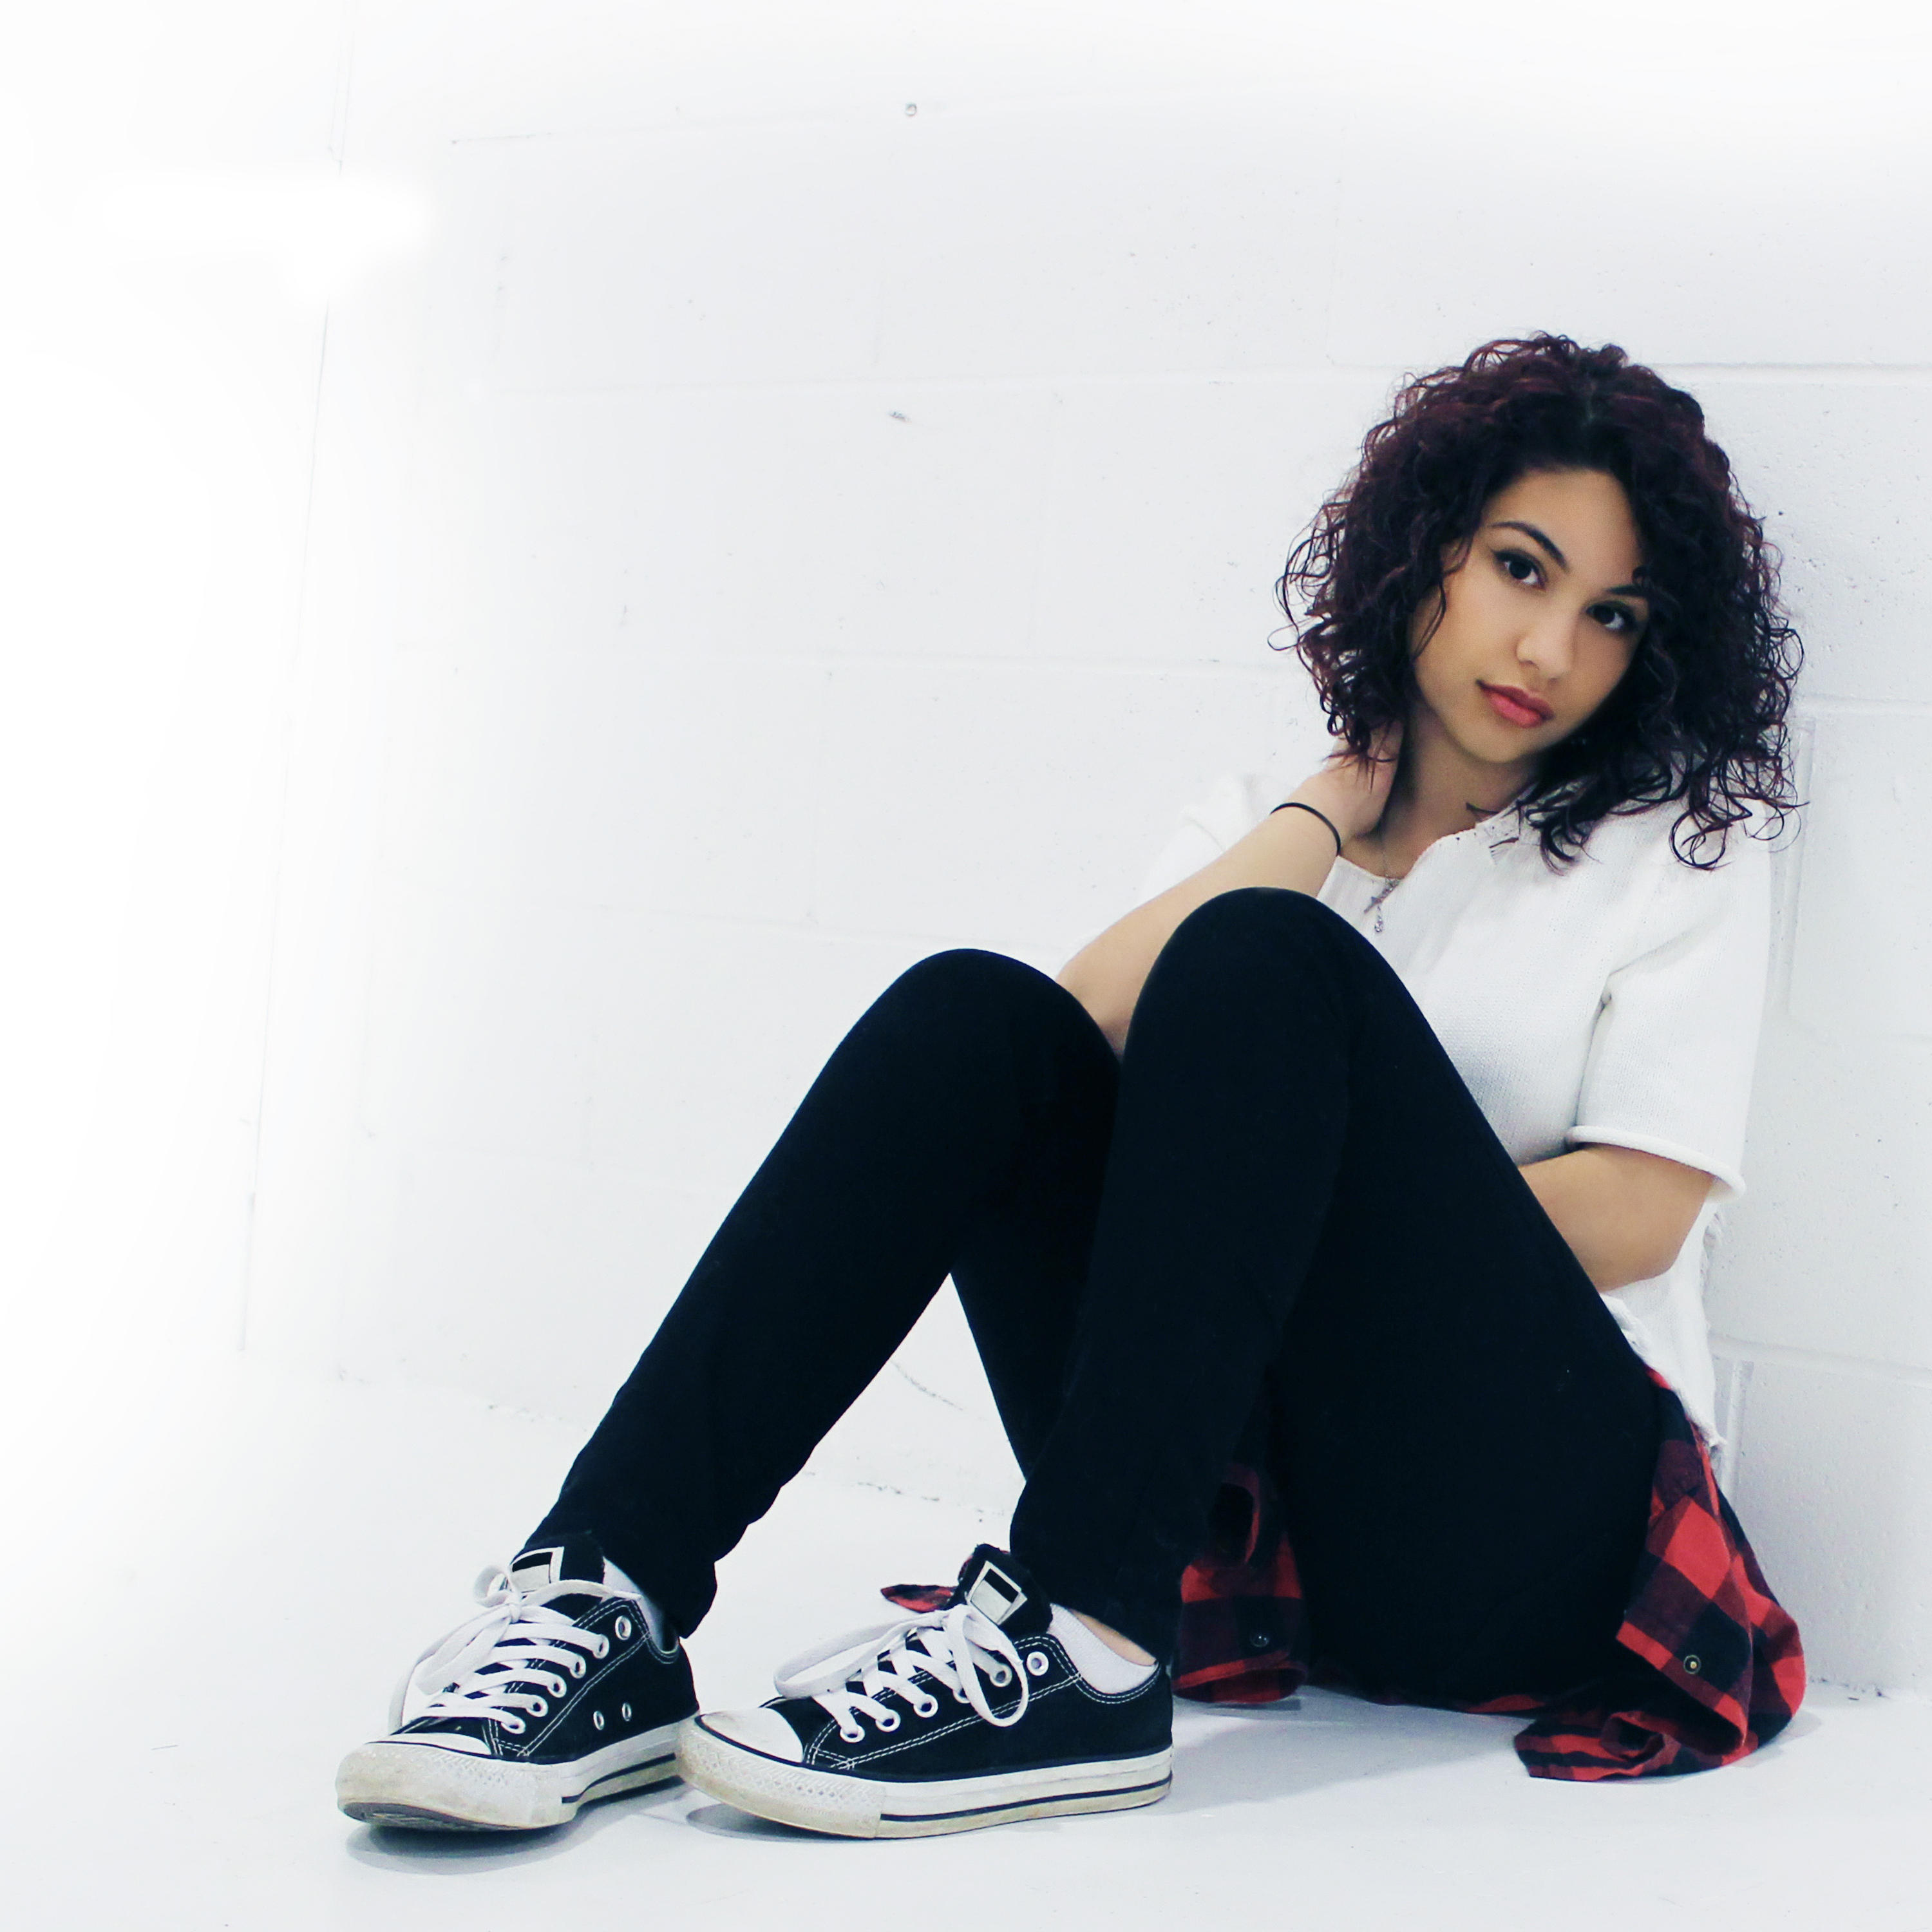 im yours alessia cara